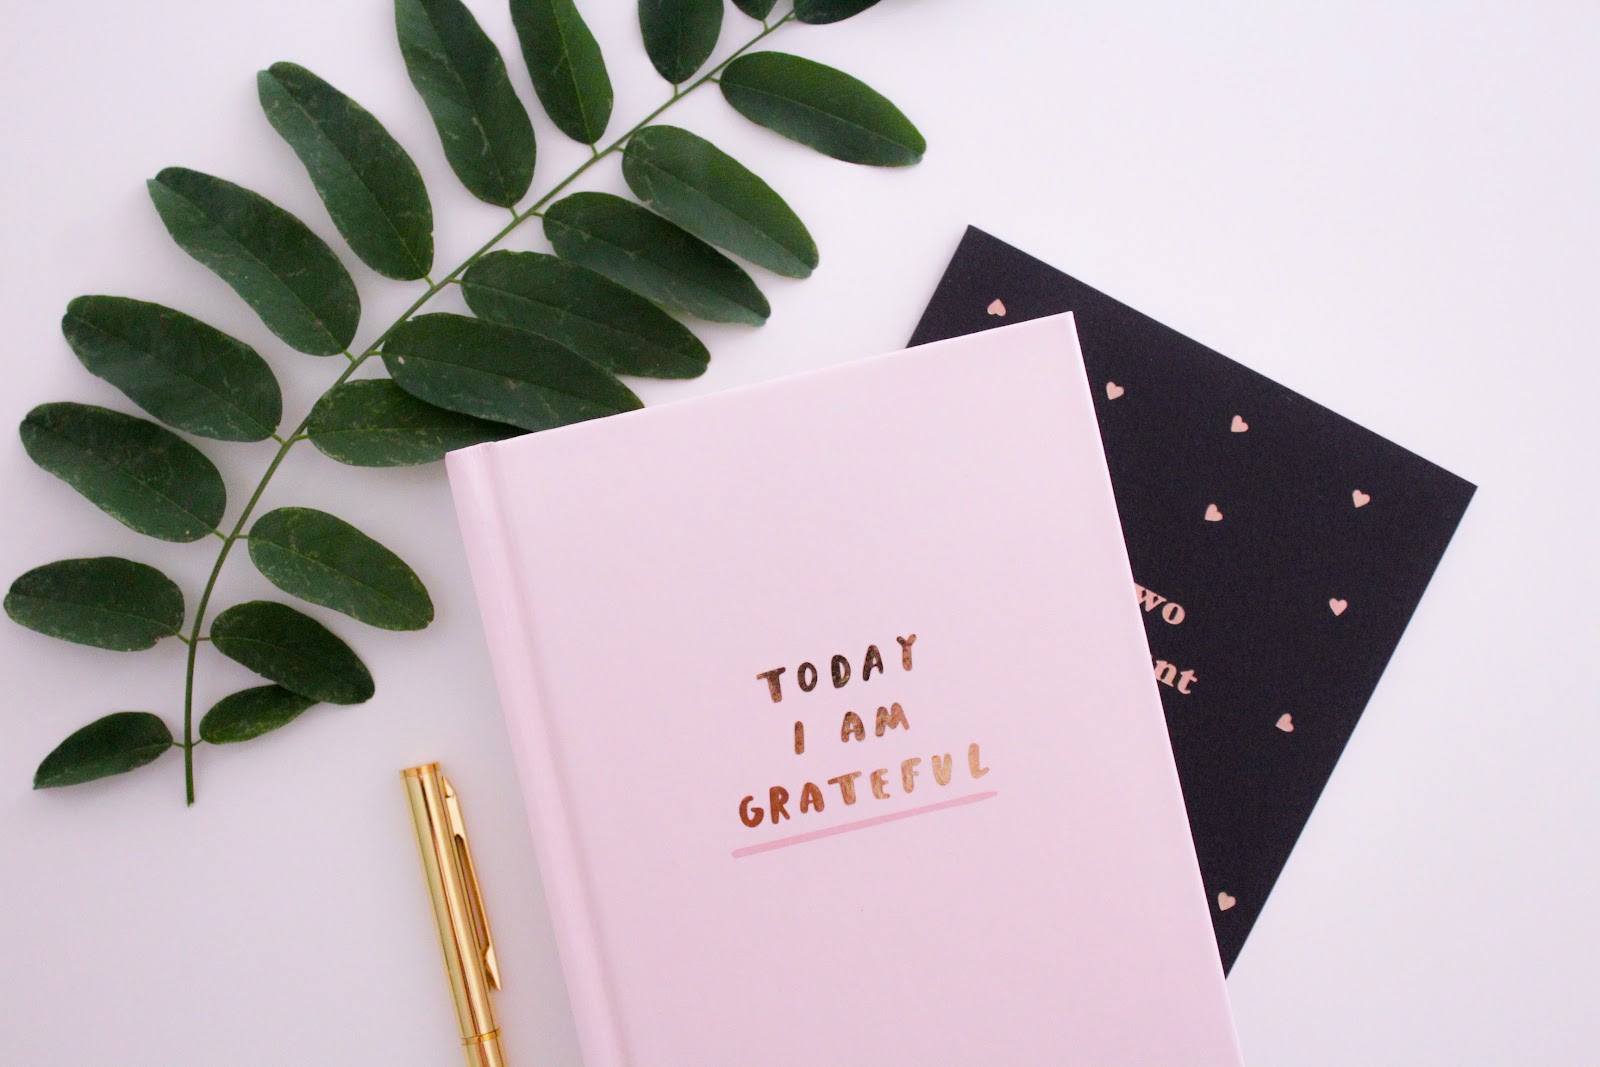 Photo by Gabrielle Henderson - gratitude journal, pens, and leaves